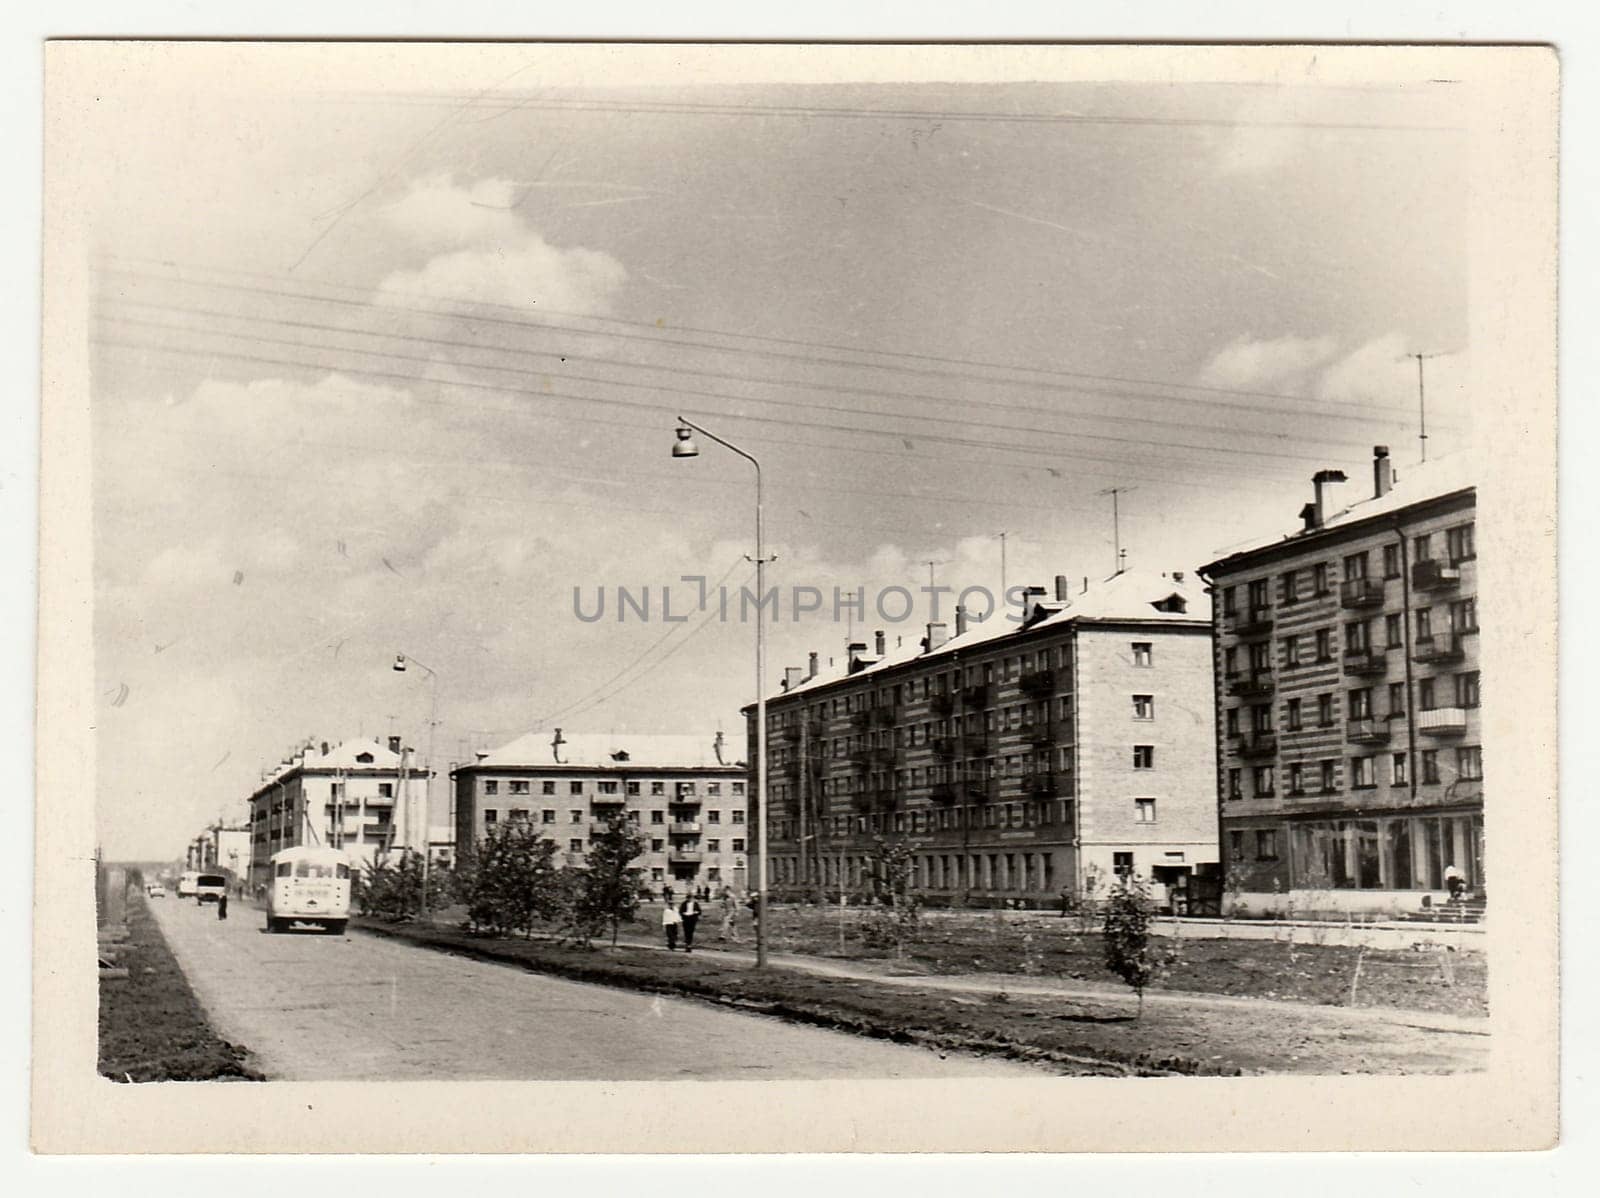 USSR - CIRCA 1970s: Vintage photo shows blocks of flats in USSR.